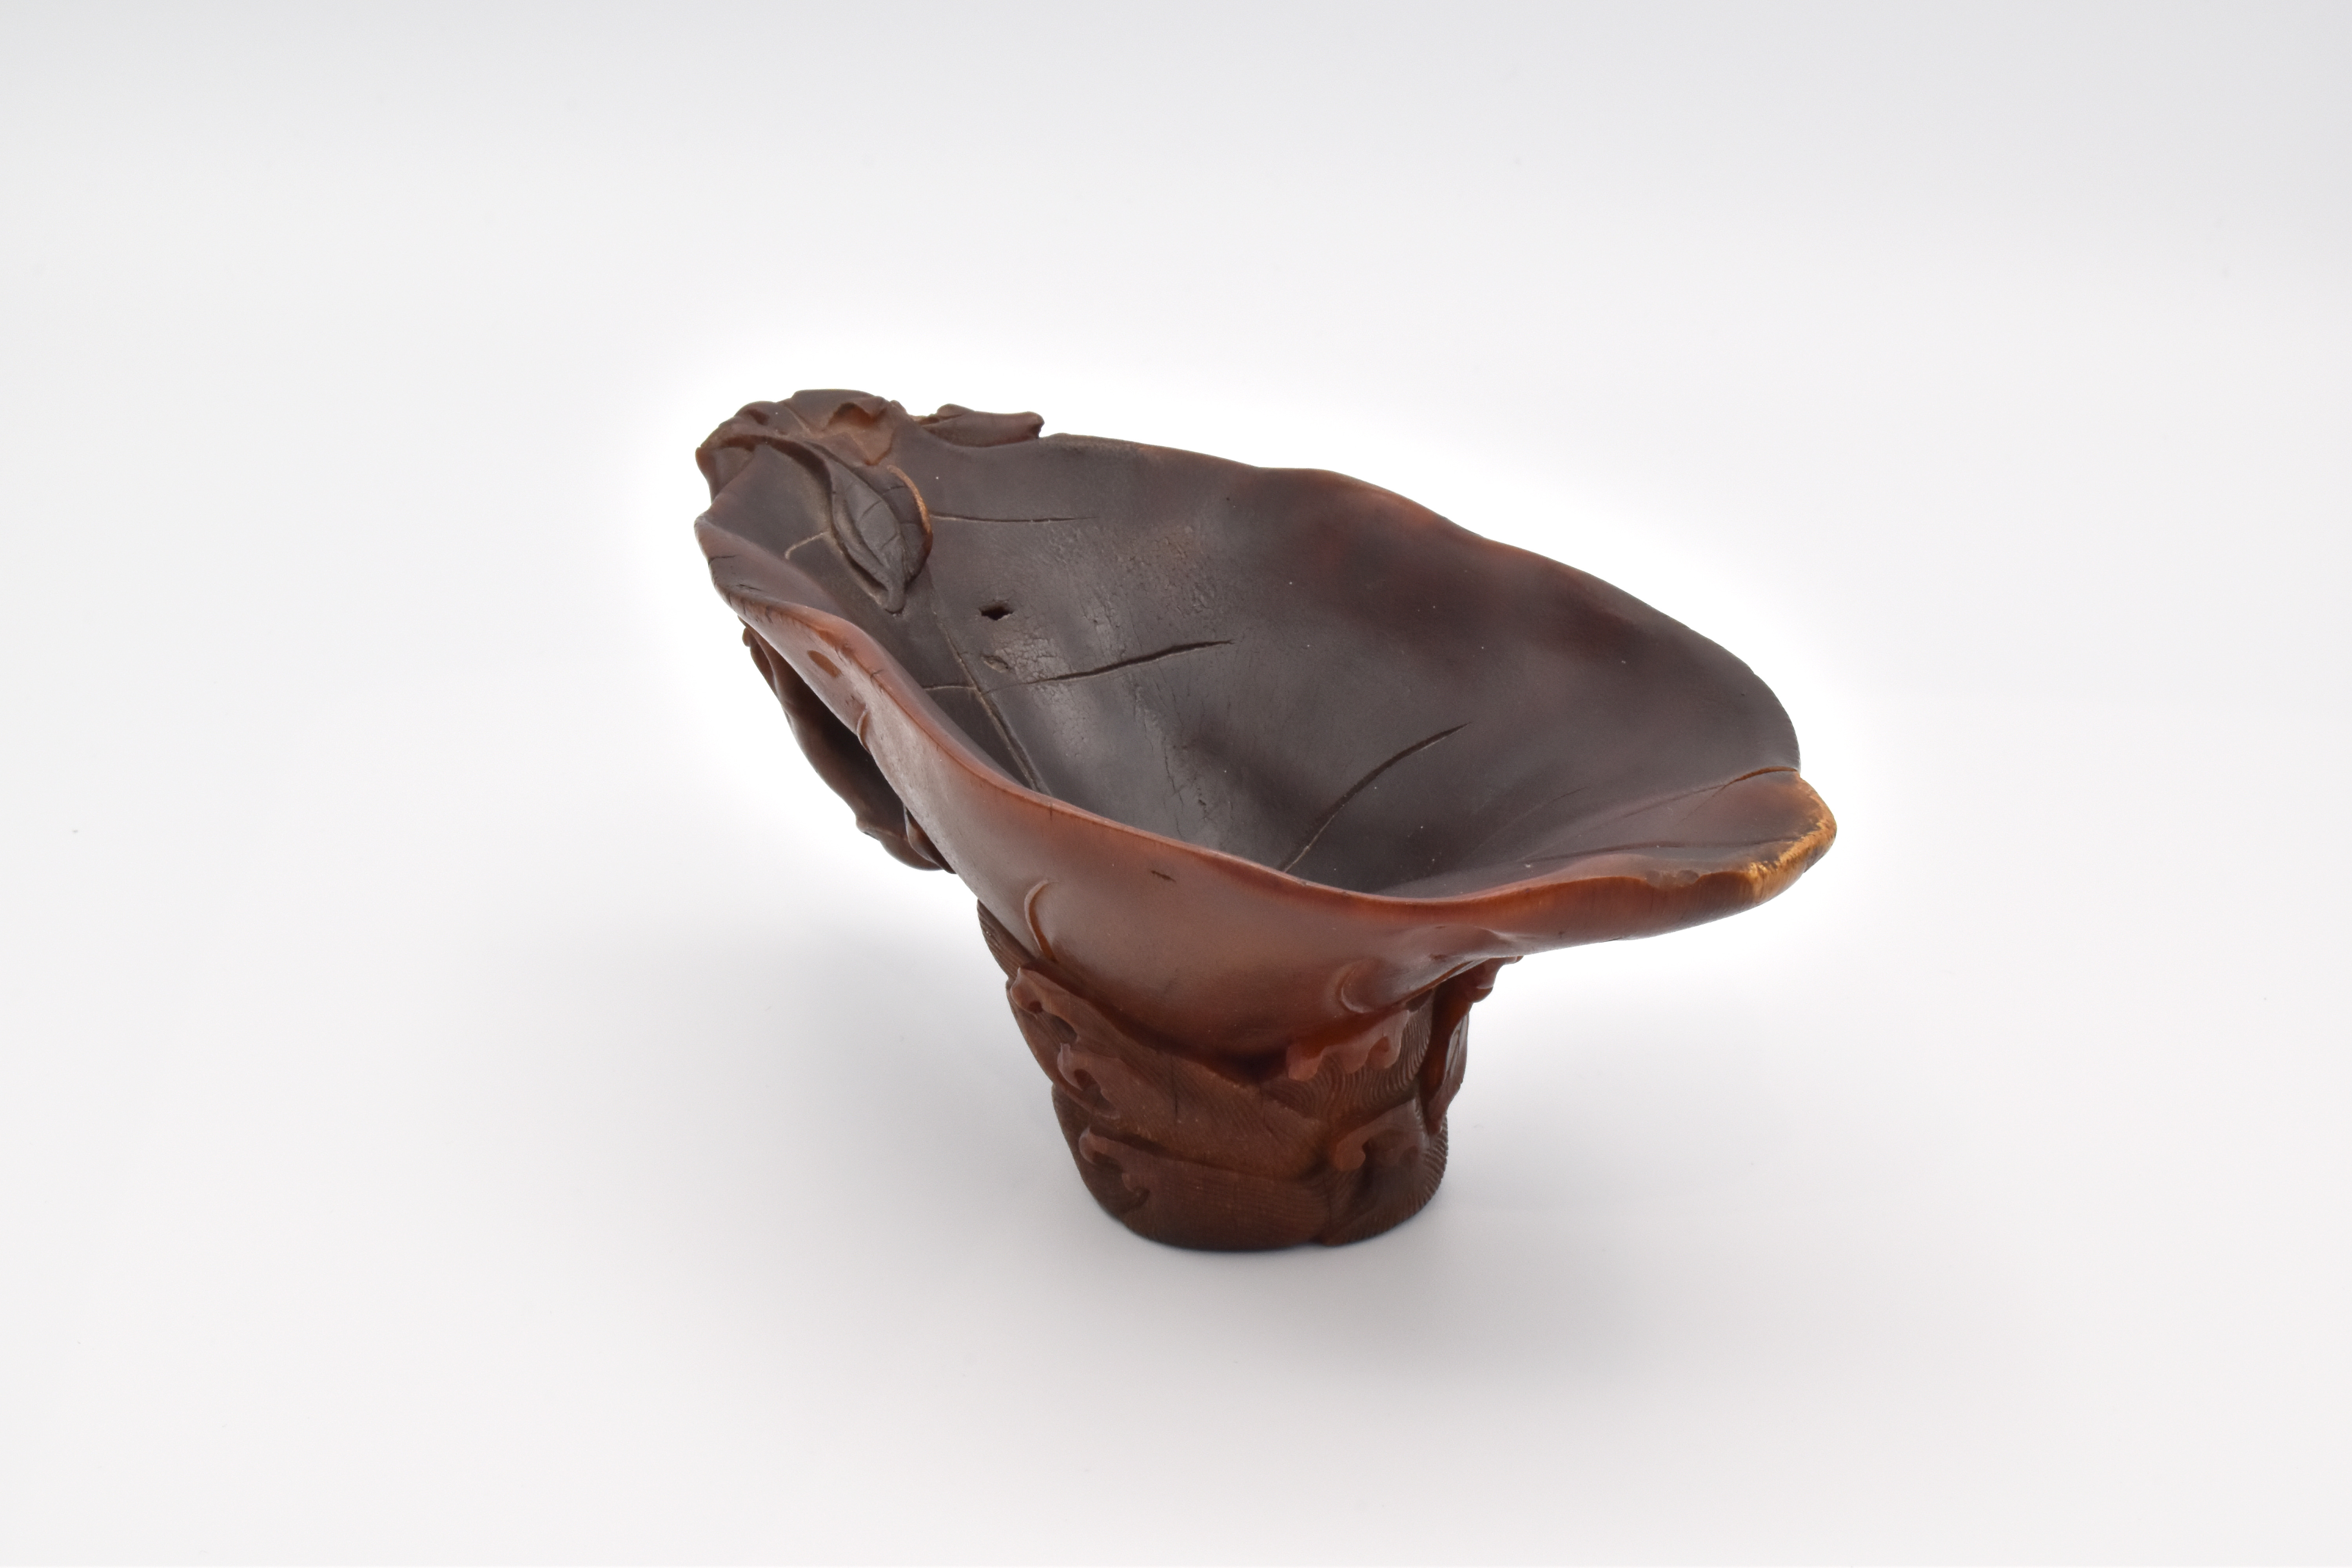 A RARE CHINESE RHINOCEROS HORN ‘CAMELLIA LEAF’ LIBATION CUP, QING DYNASTY, 17TH CENTURY - Image 2 of 30